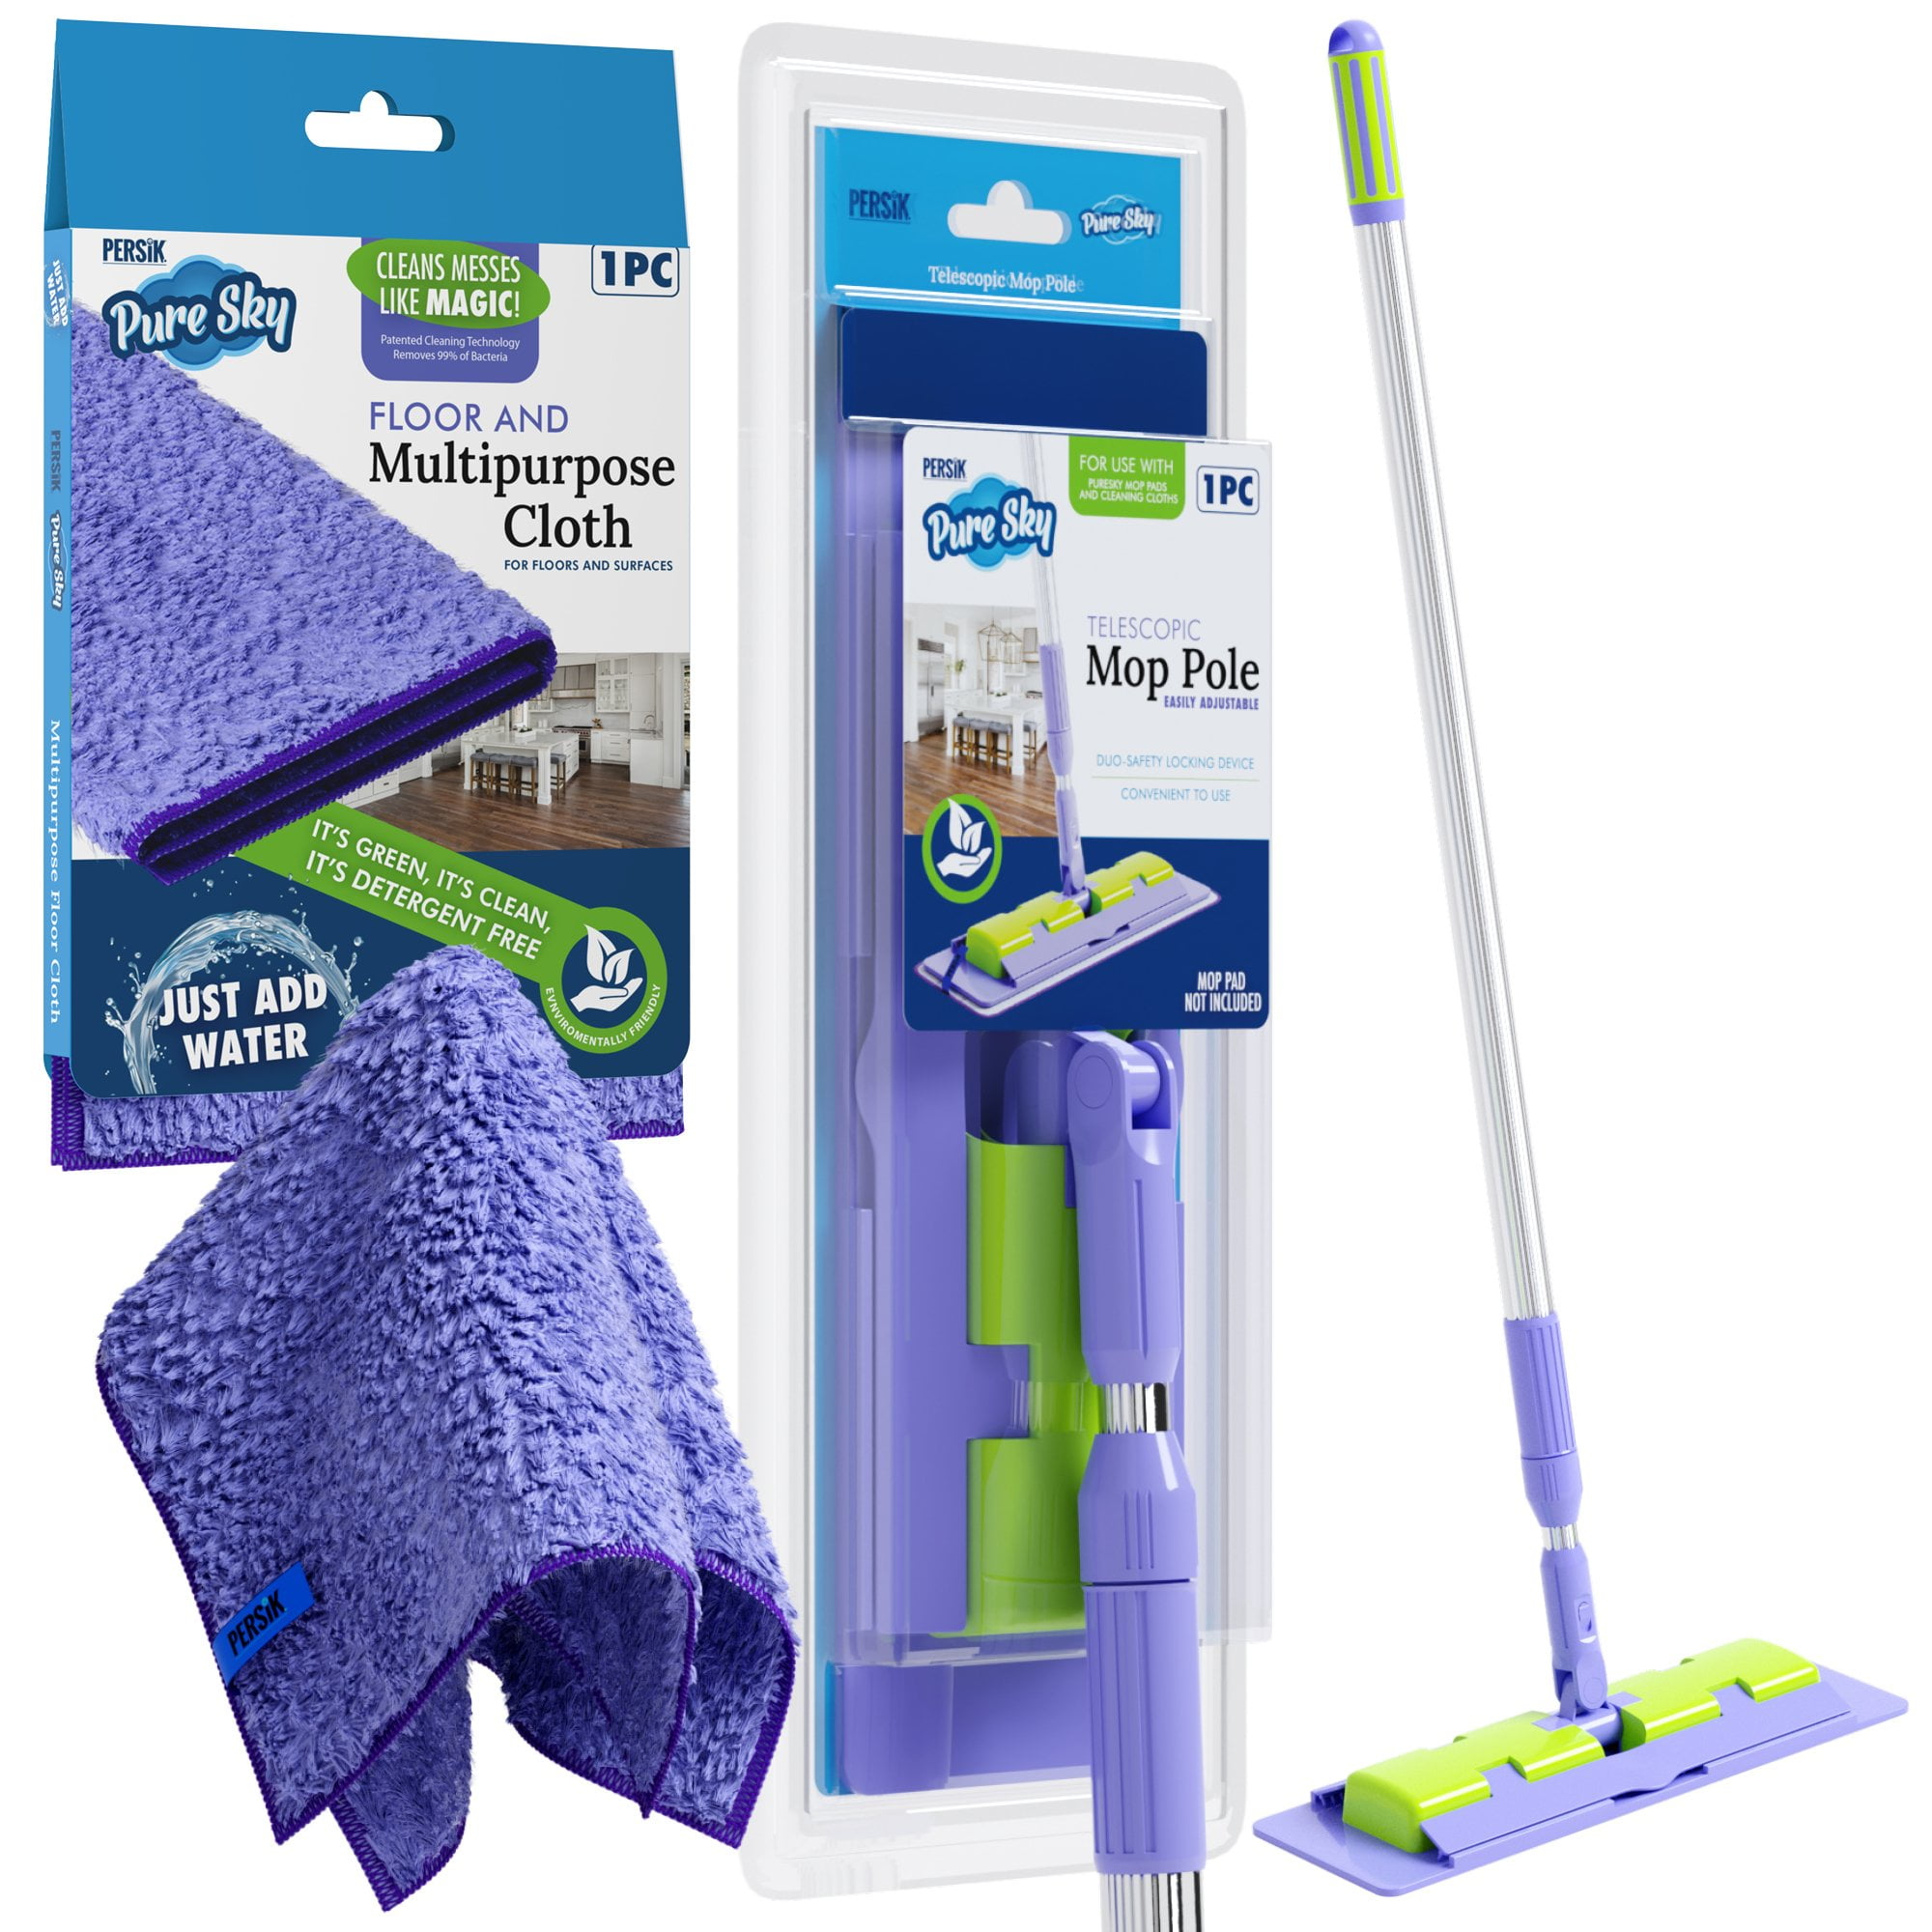 Magic Deep Clean Floor Mop - JUST ADD Water No Needed - Ultra Microfiber Damp Mop Cleaner - Includes Pole Light Weight, Strong Durable Pole + Includes Attachable Towel -